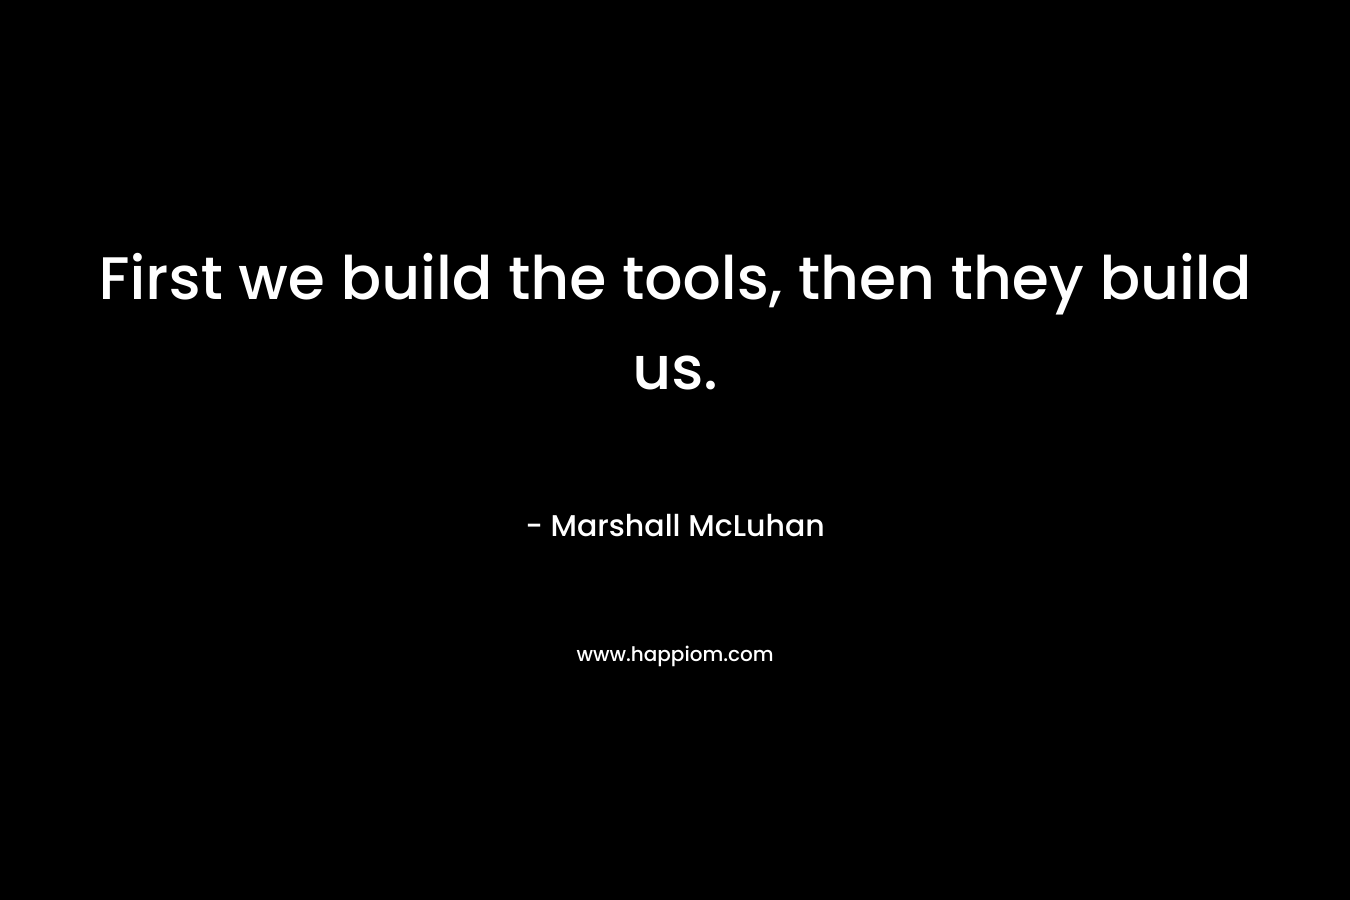 First we build the tools, then they build us. – Marshall McLuhan